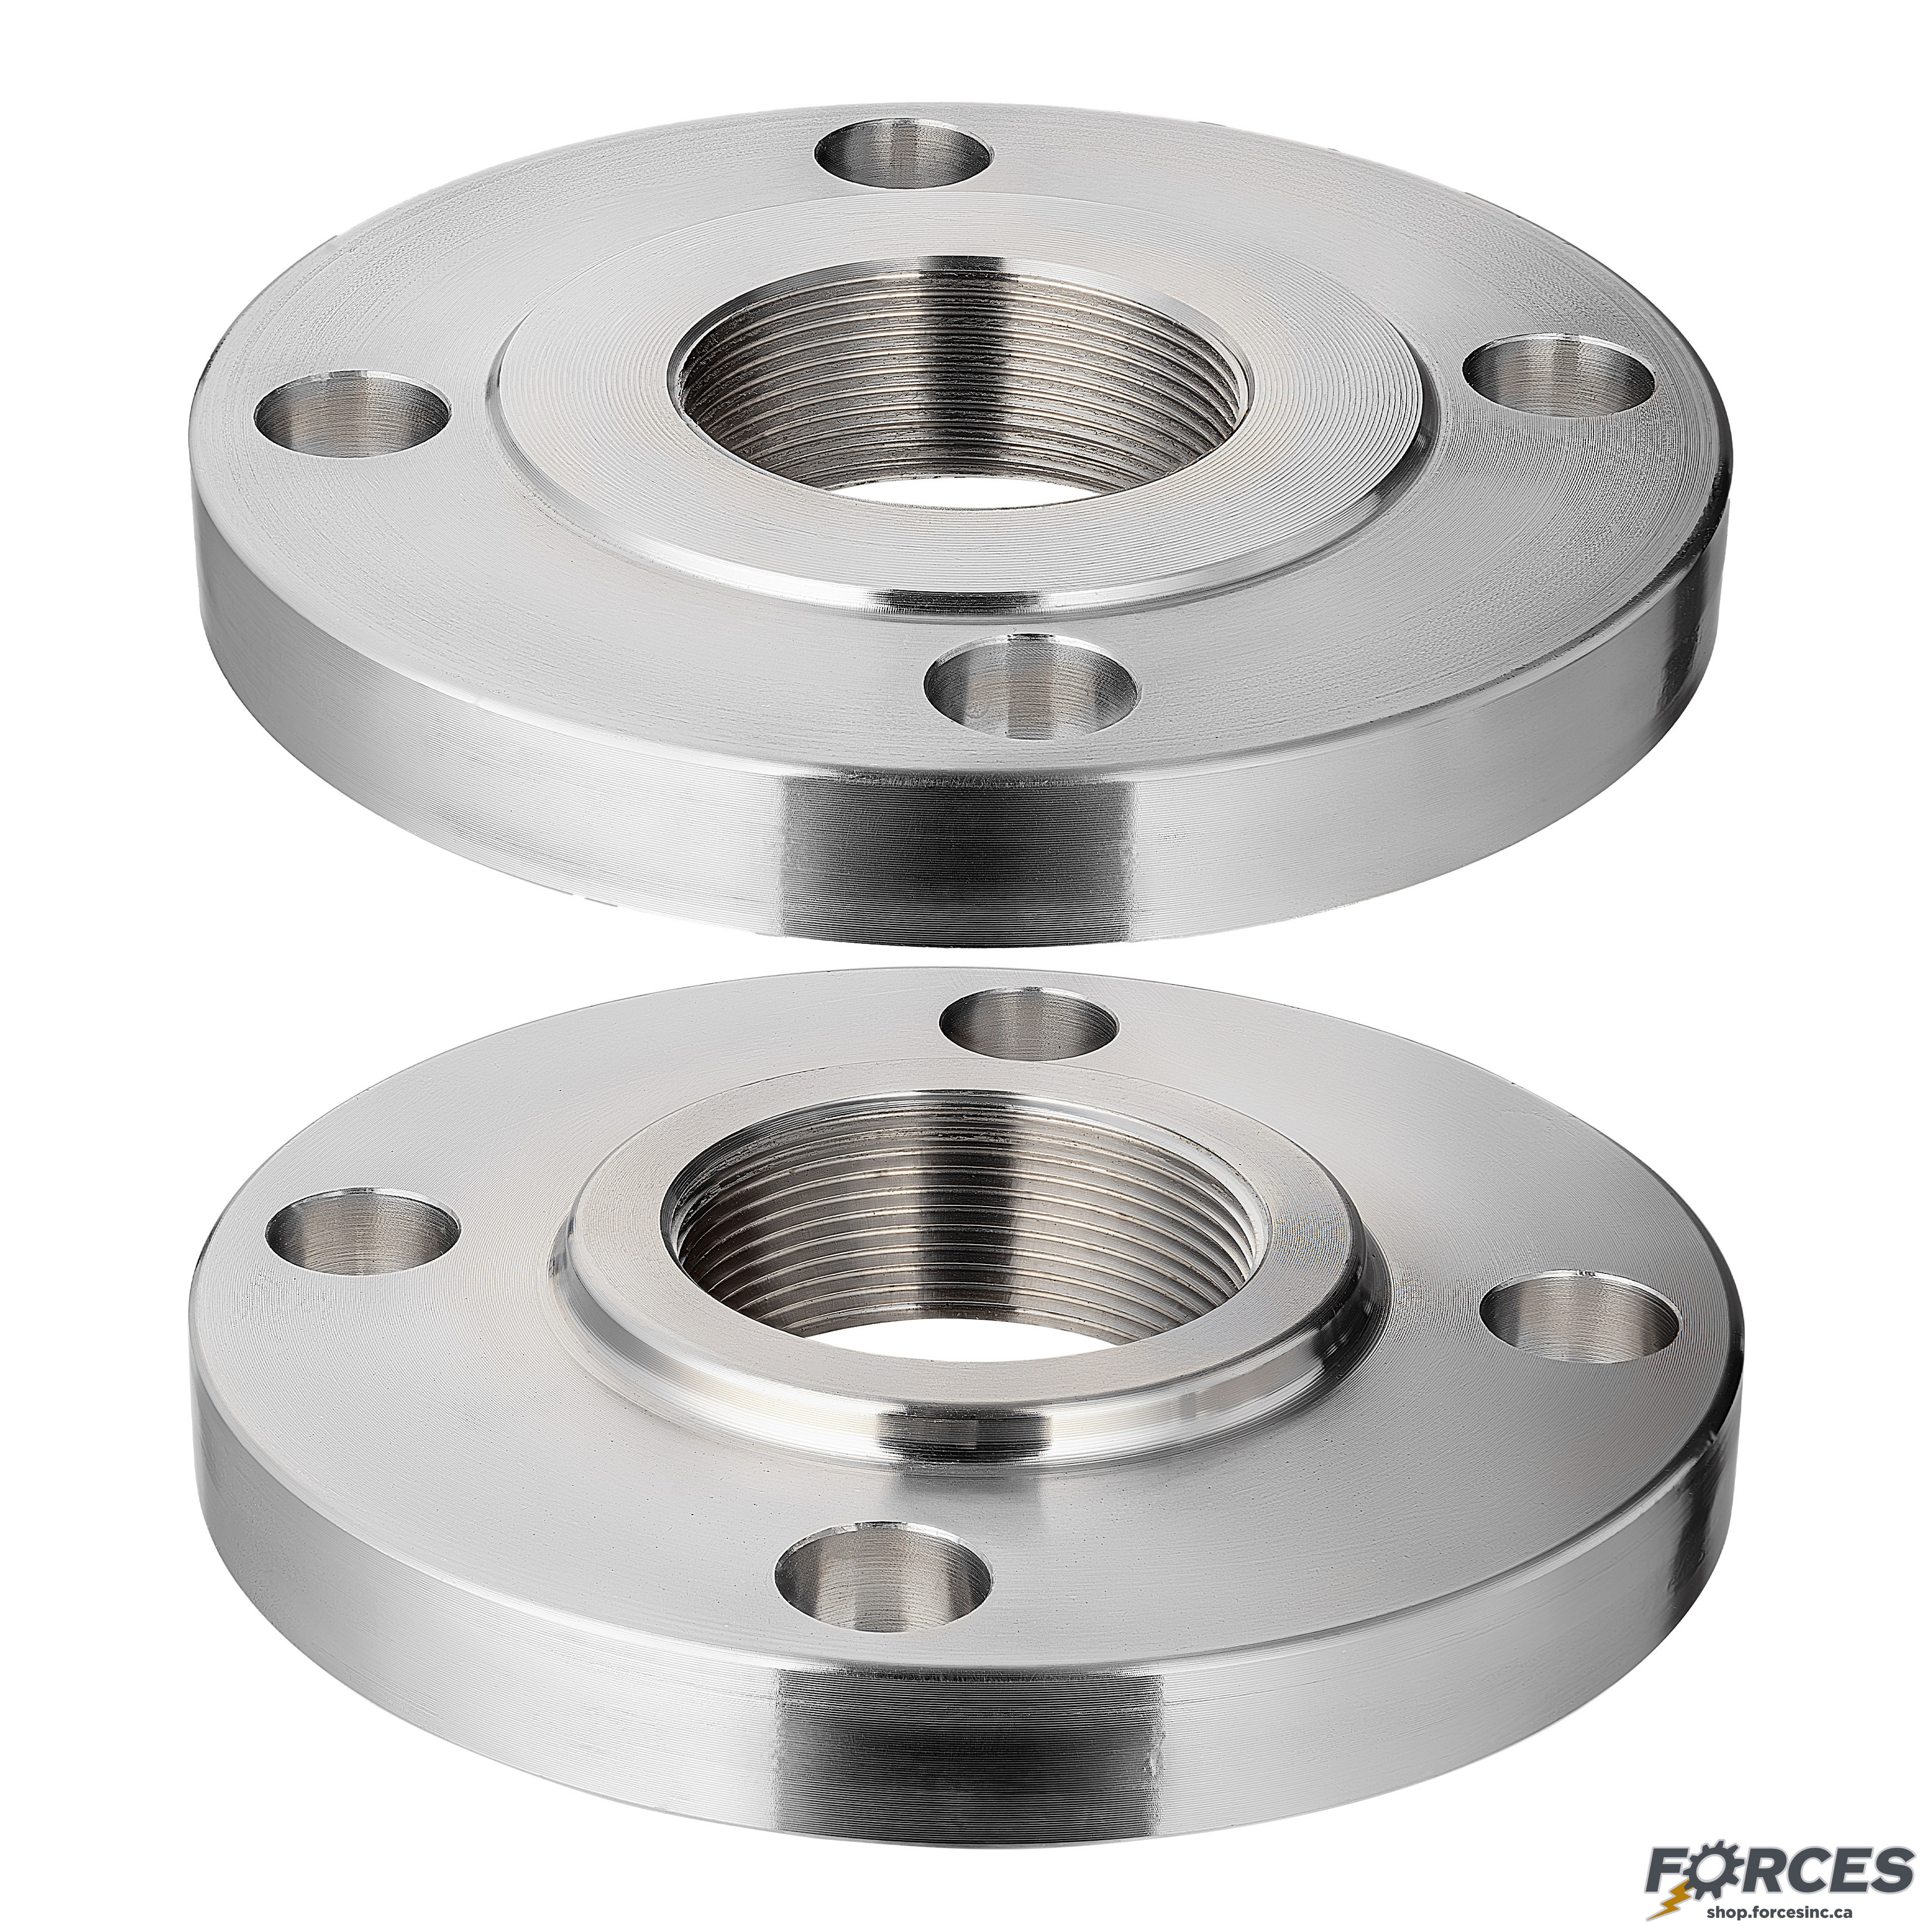 3" Threaded Flange NPT Class #150 - Stainless Steel 304 - Forces Inc